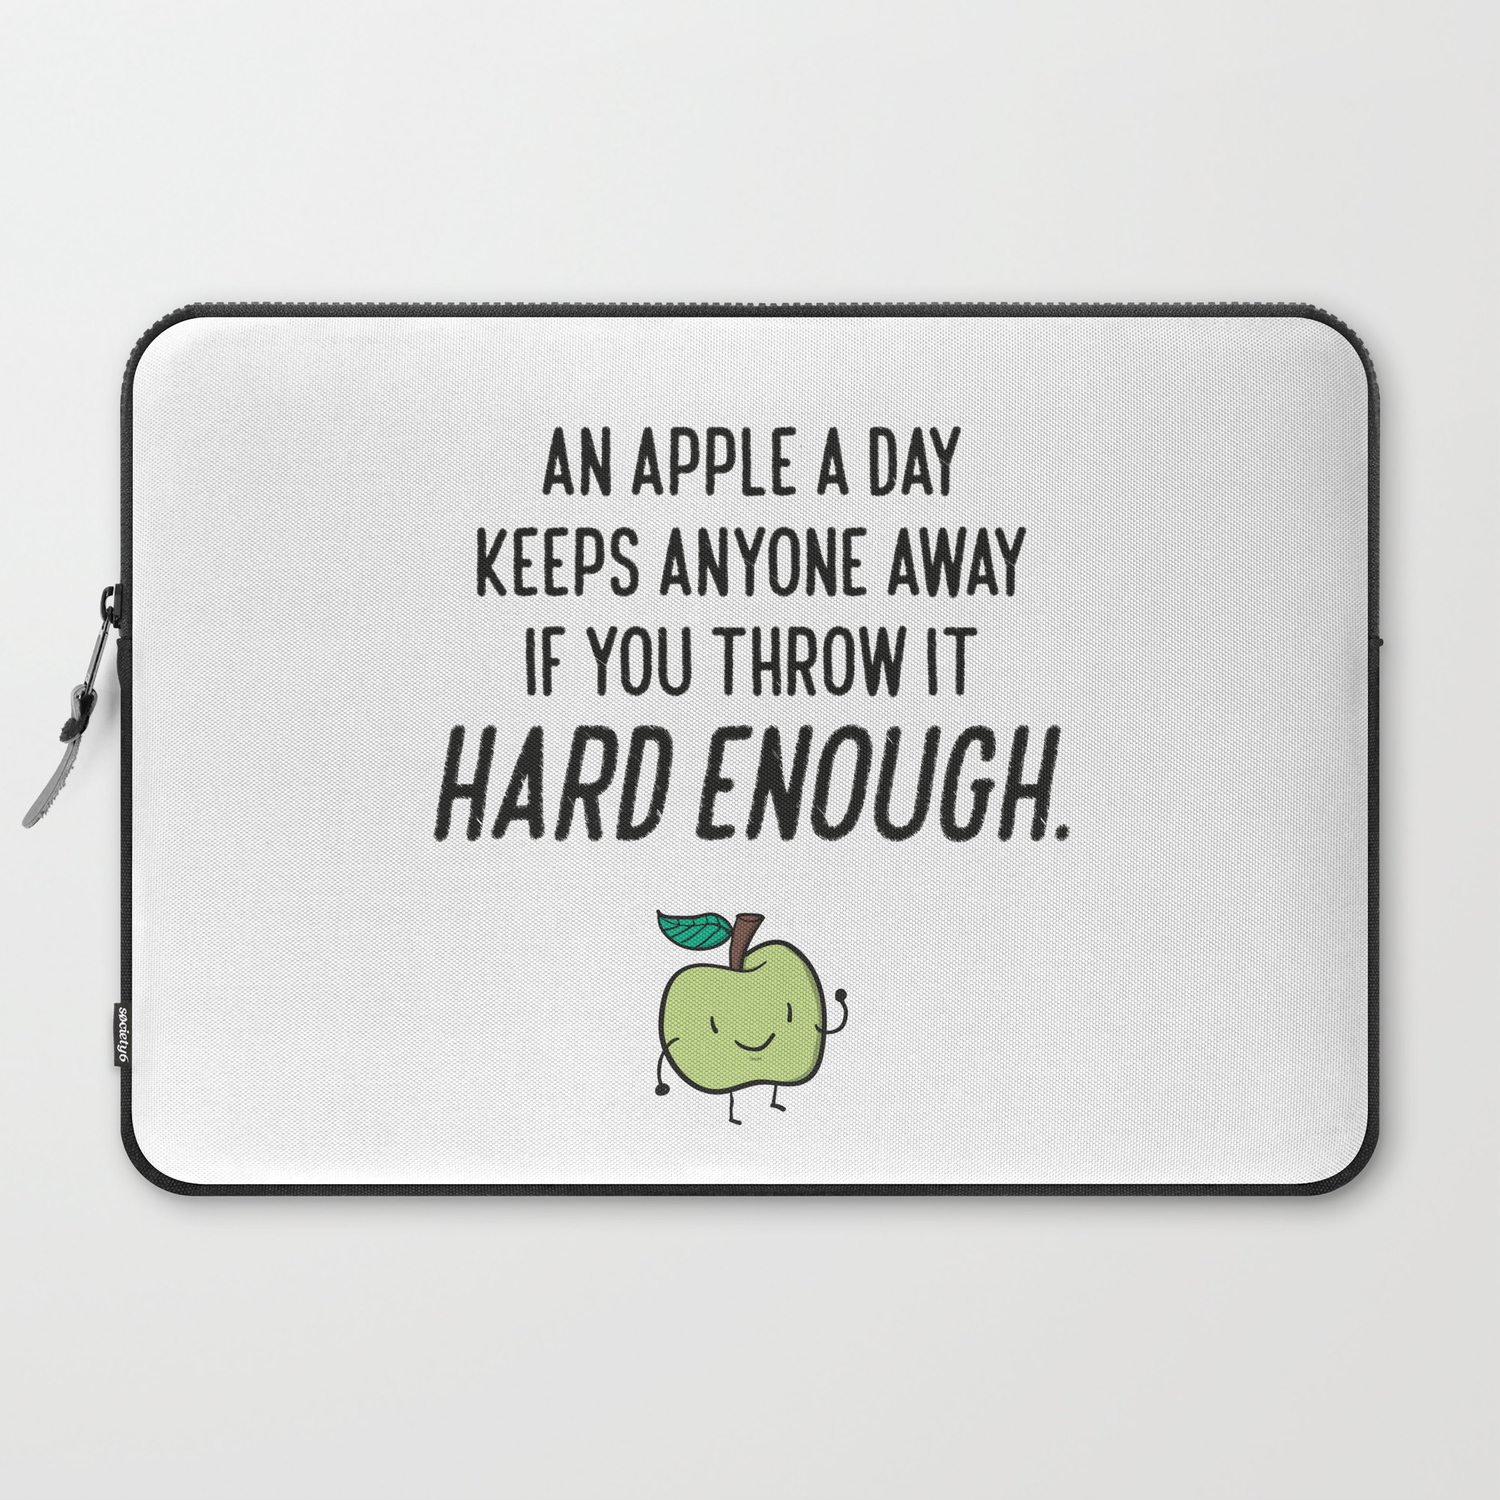 Funny Apple Sarcasm Humor Quotes Laptop Sleeve by kick-ass-art | Society6